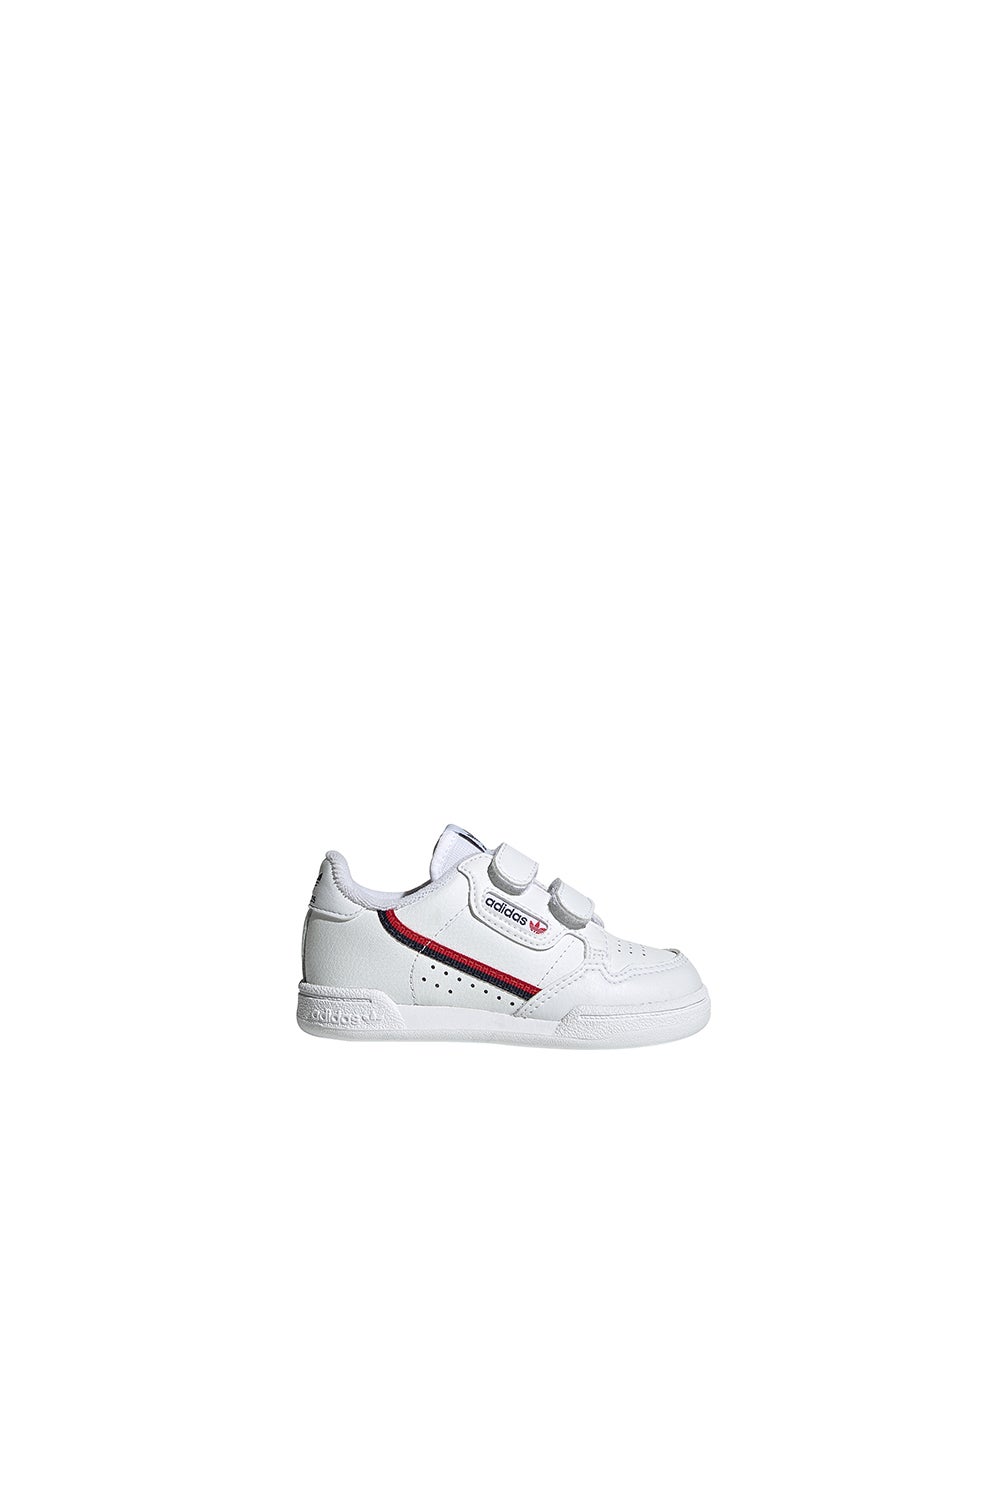 adidas Continental 80 Infant Shoes Cloud White